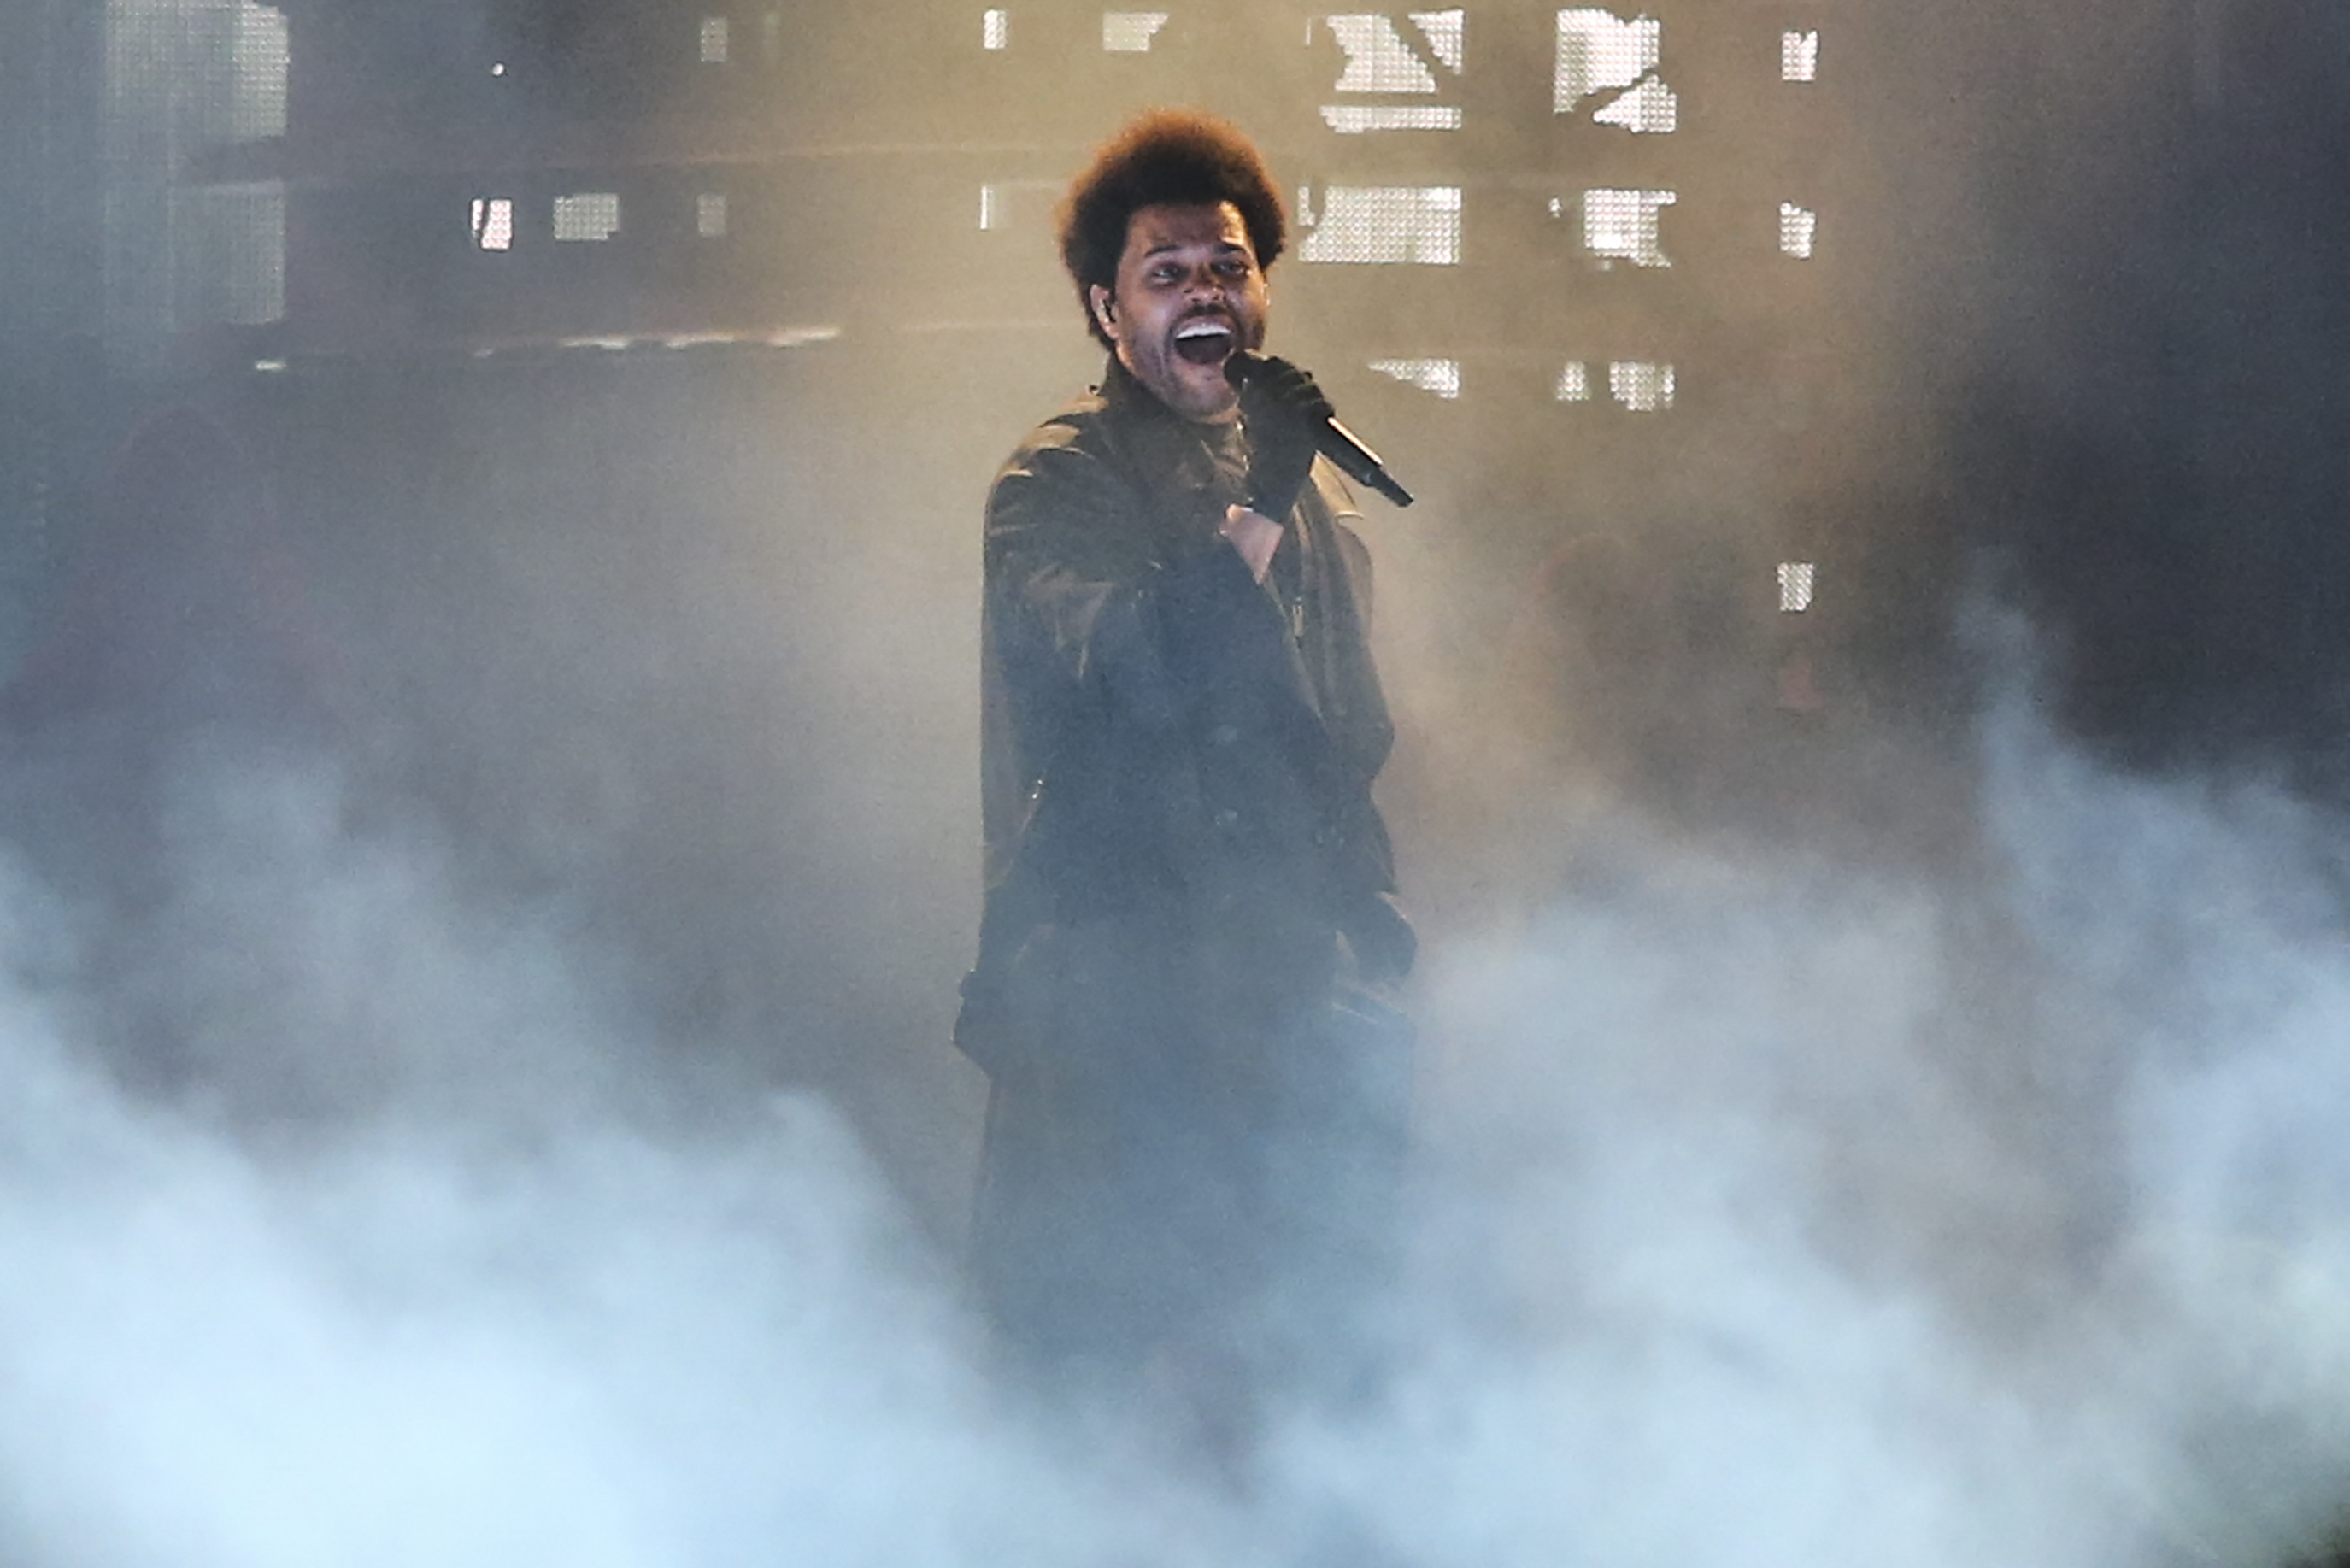 Review: The Weeknd's 'After Hours